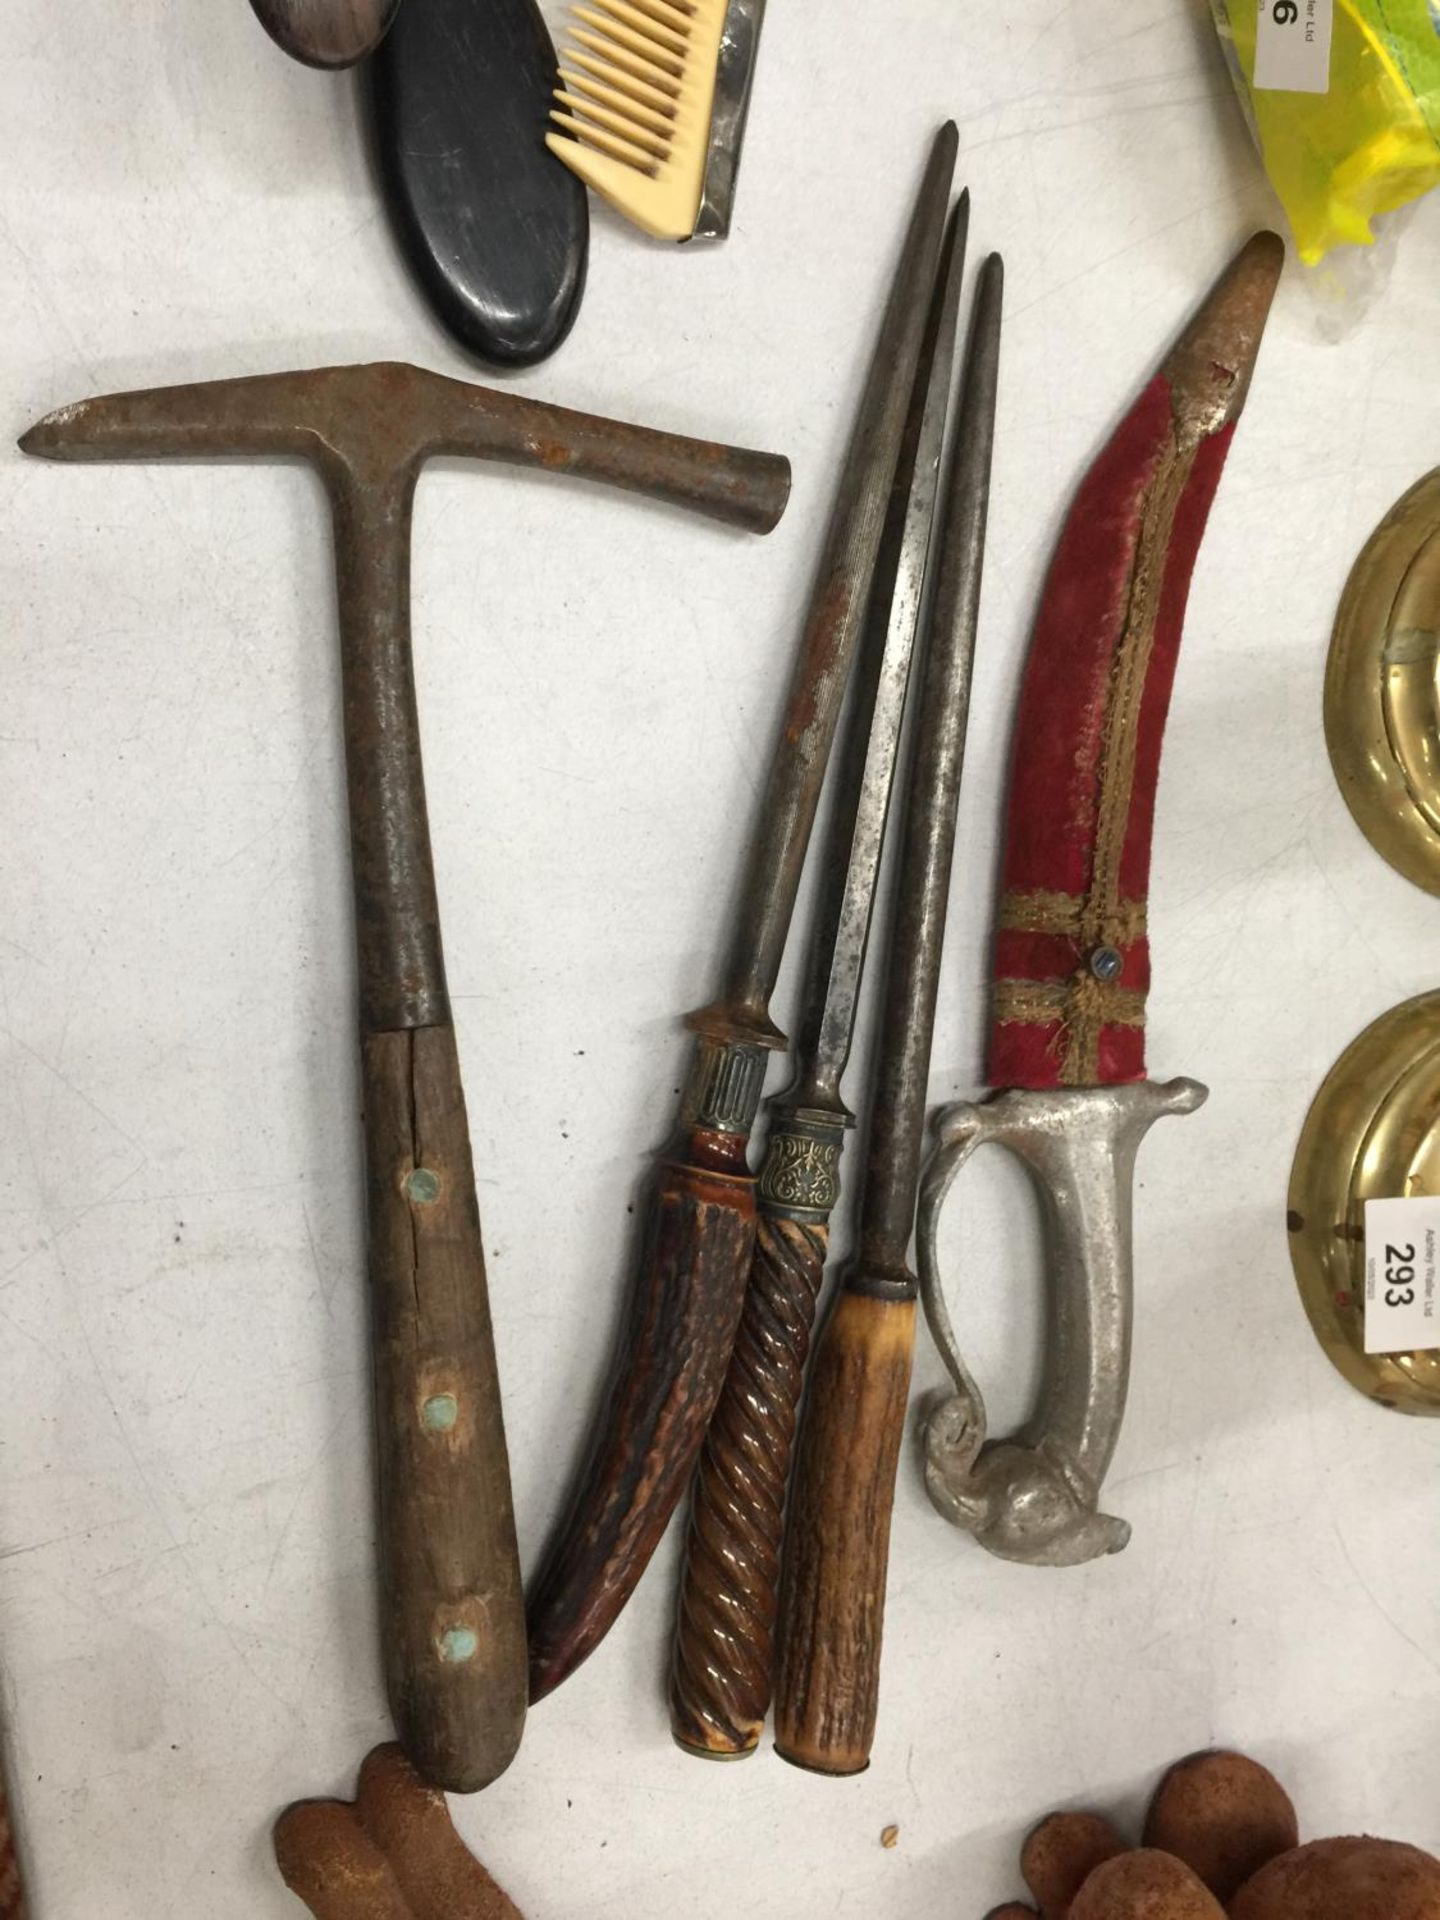 A QUANTITY OF VINTAGE TOOLS TO INCLUDE A ROBERTS HAMMER PLUS AN ASIAN STYLE DAGGER IN A SHEATH